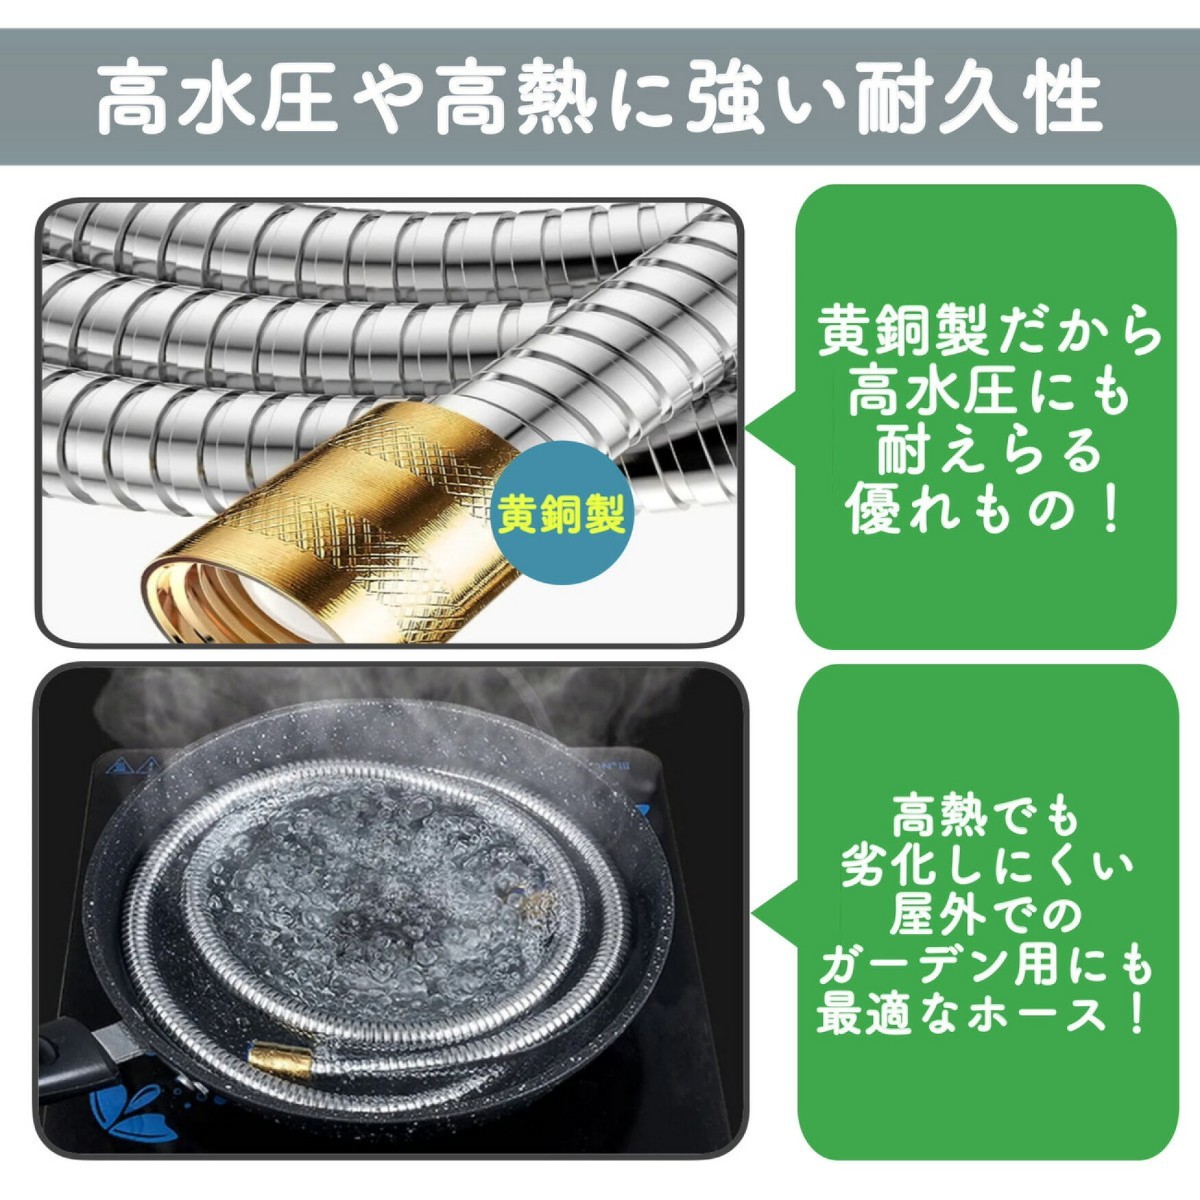  shower hose stainless steel exchange for exchange 1.5m hose shower mold prevention rust prevention bath bathroom lavatory size exchange all-purpose 